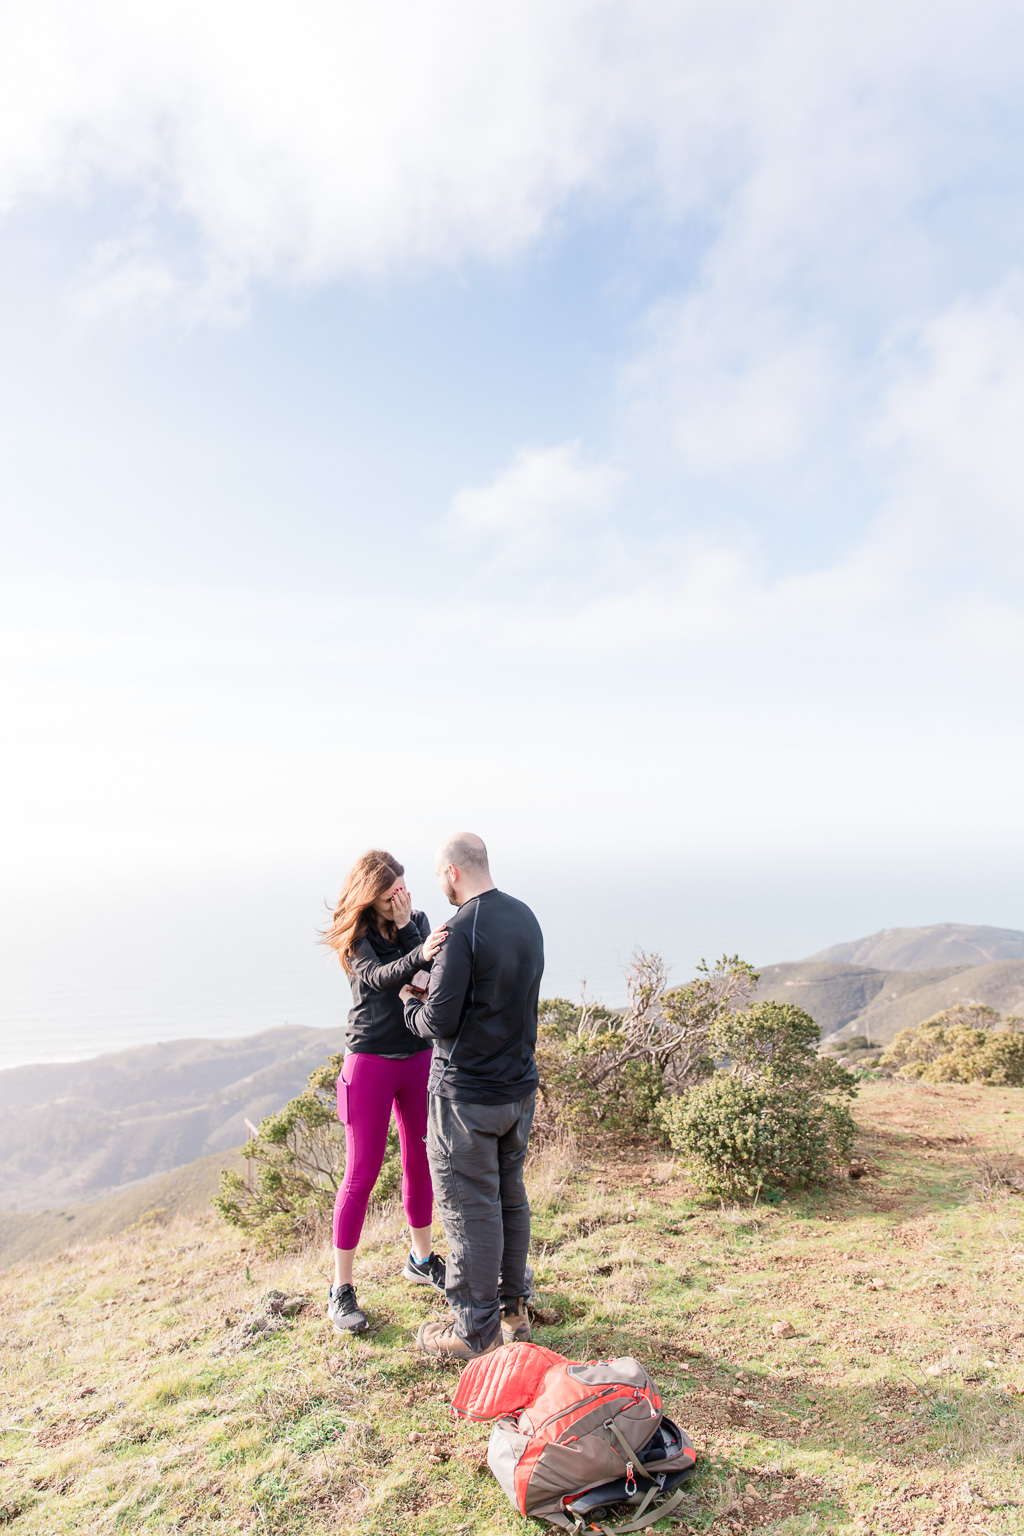 Surprise engagement captured by professional photographers on top of the mountains